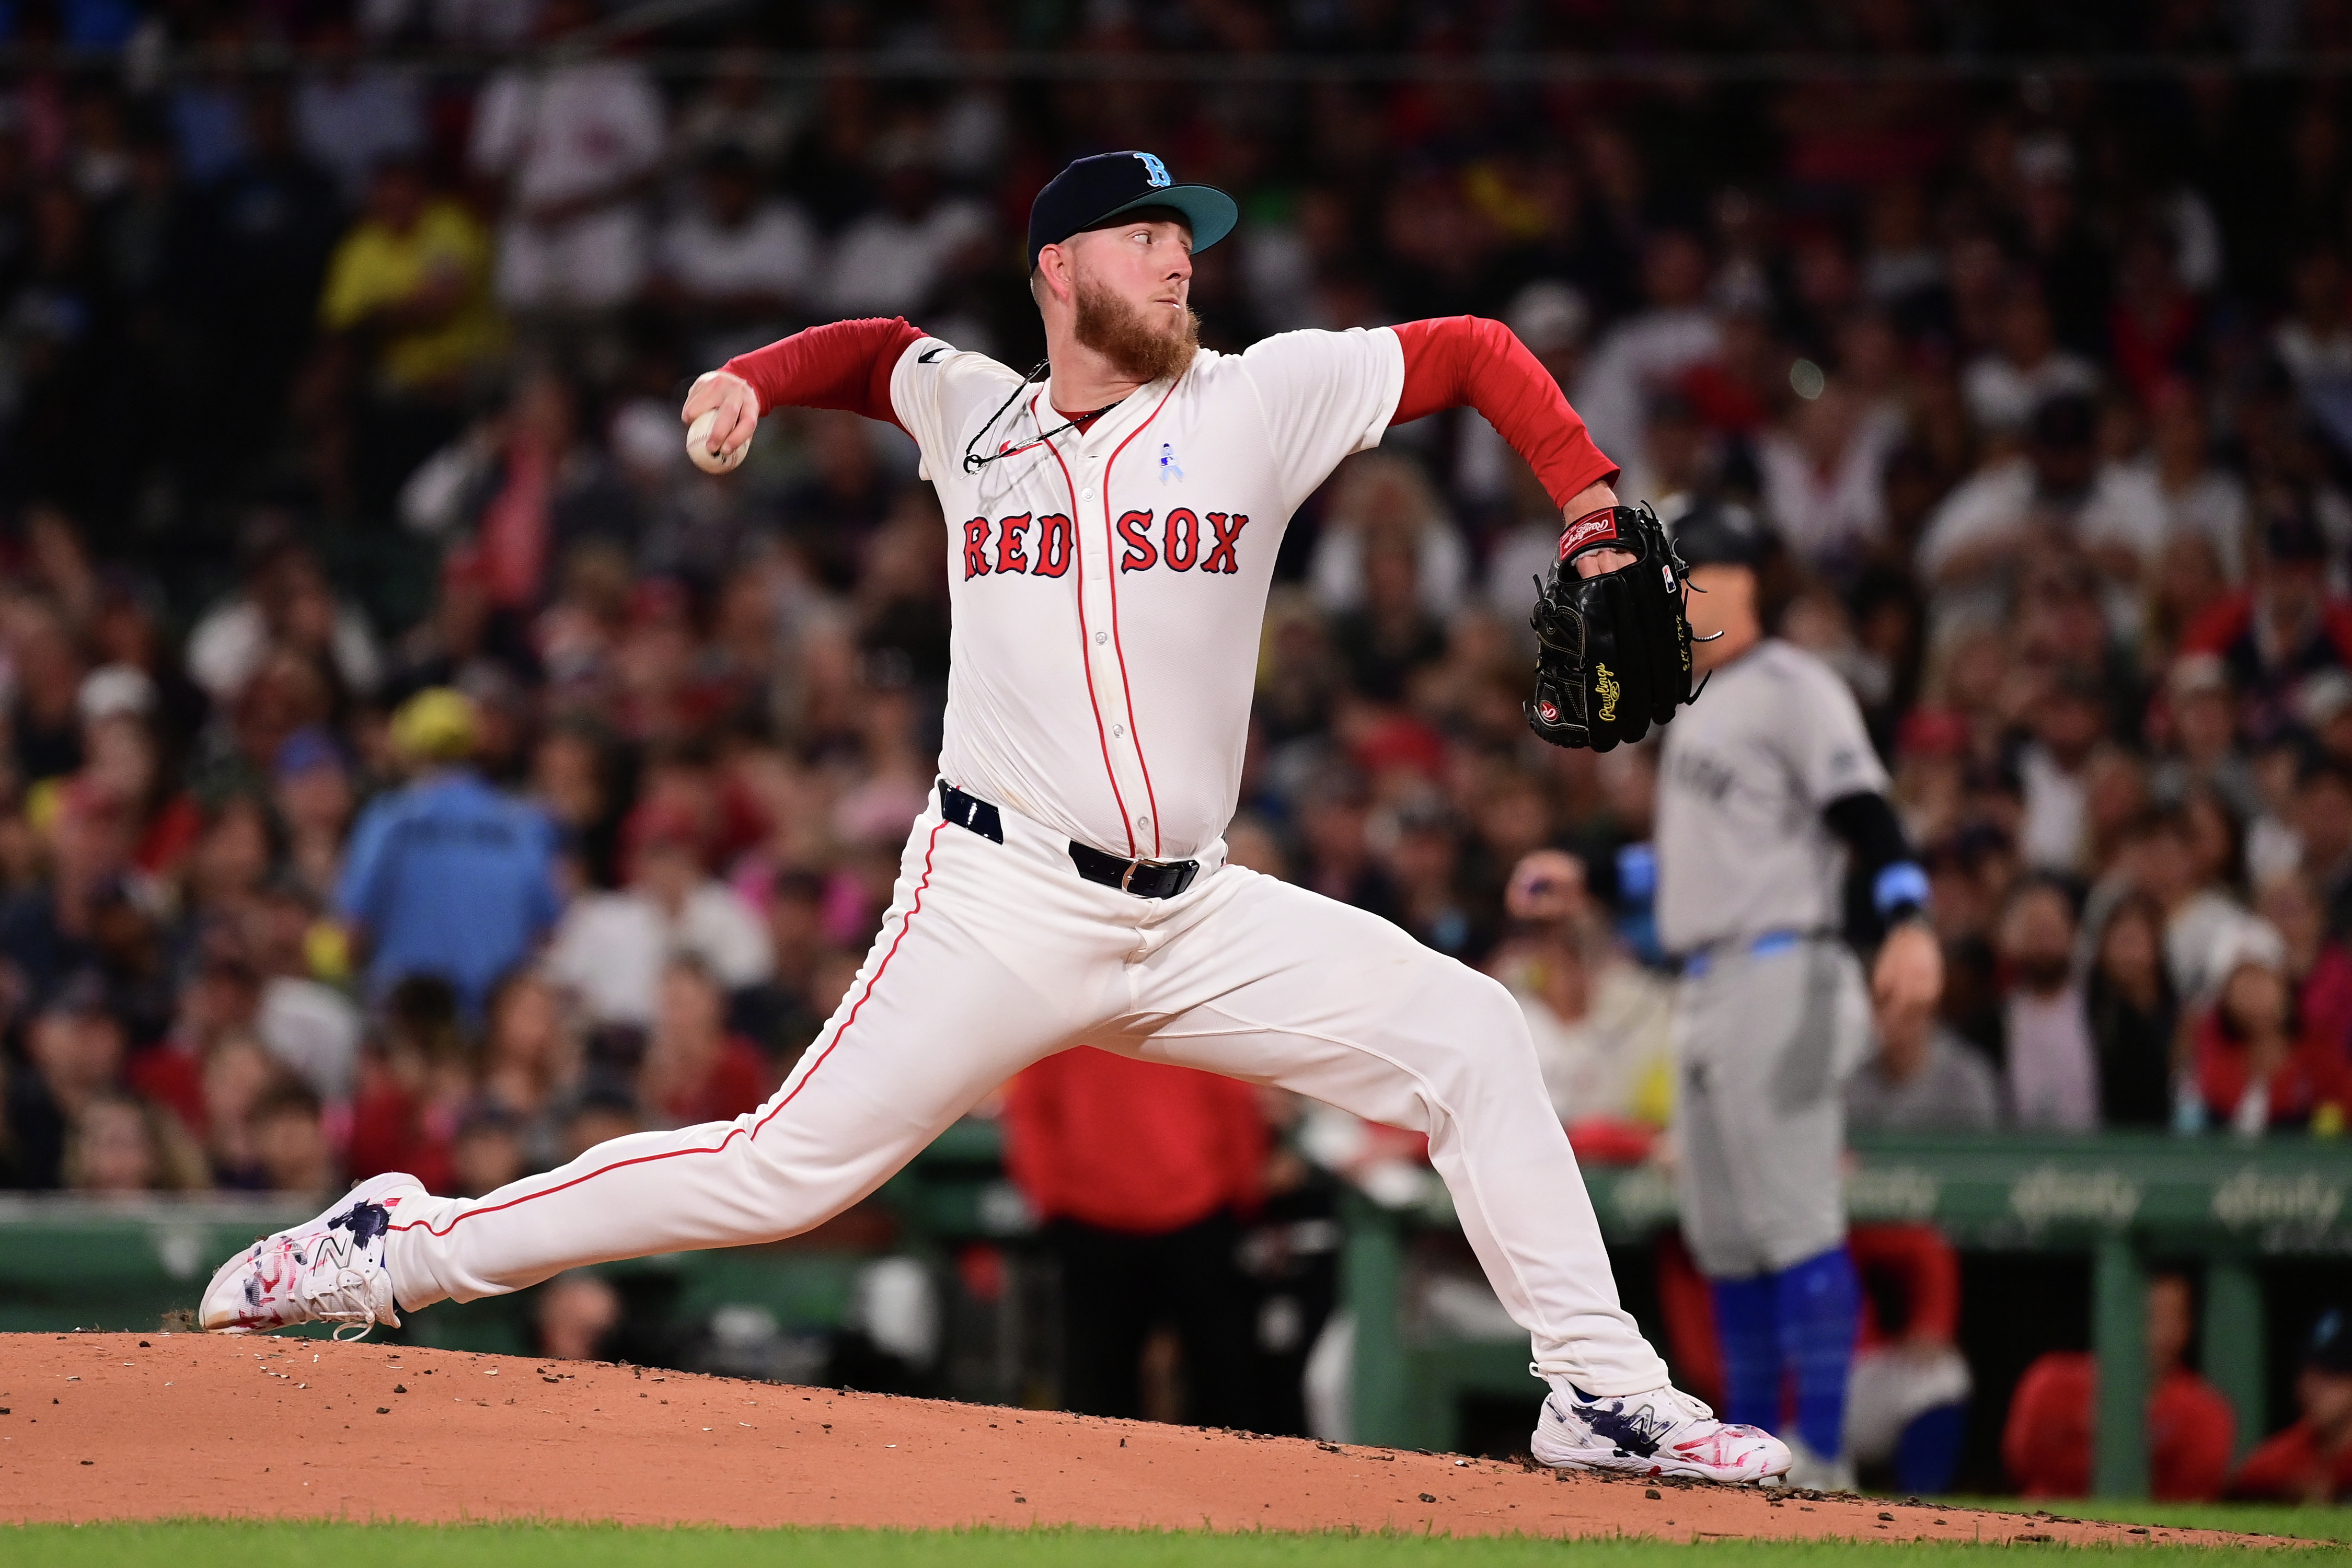 Zack Kelly keeps the Red sox on top after getting out of a bases-loaded, no out jam